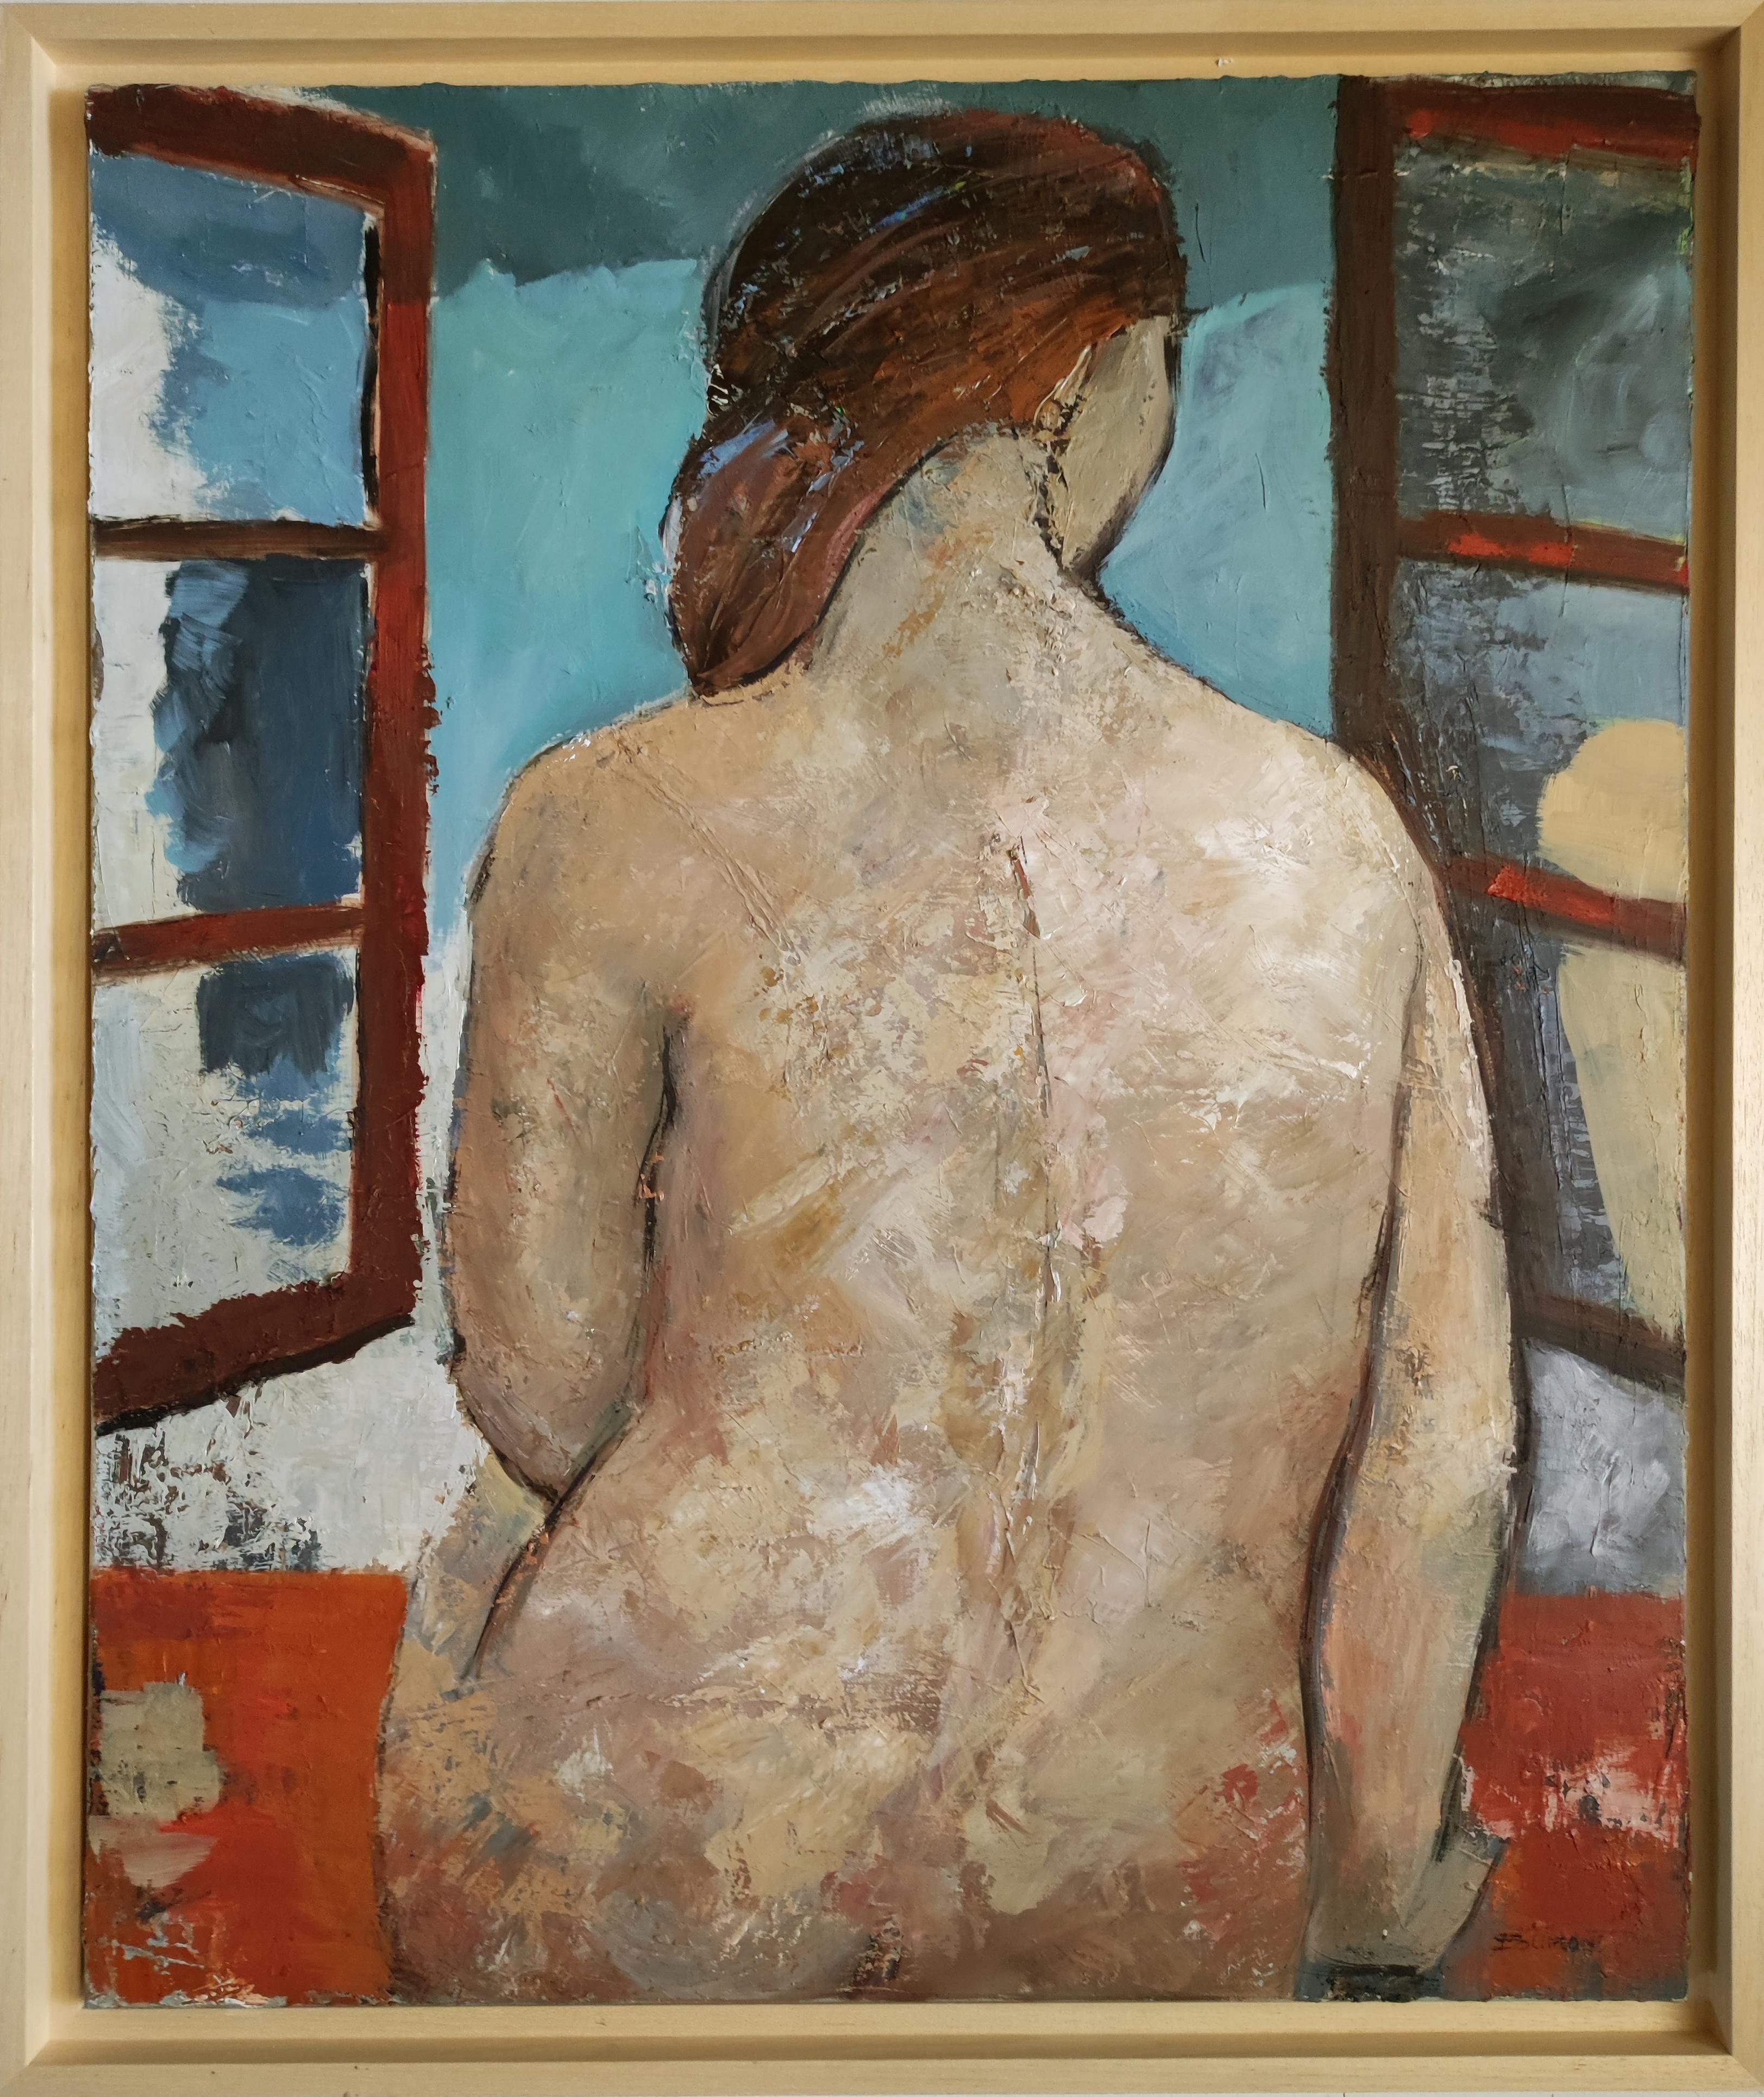 SOPHIE DUMONT Figurative Painting - secrets thoughts, nude woman, figurative modern, oil on canvas, textured, France